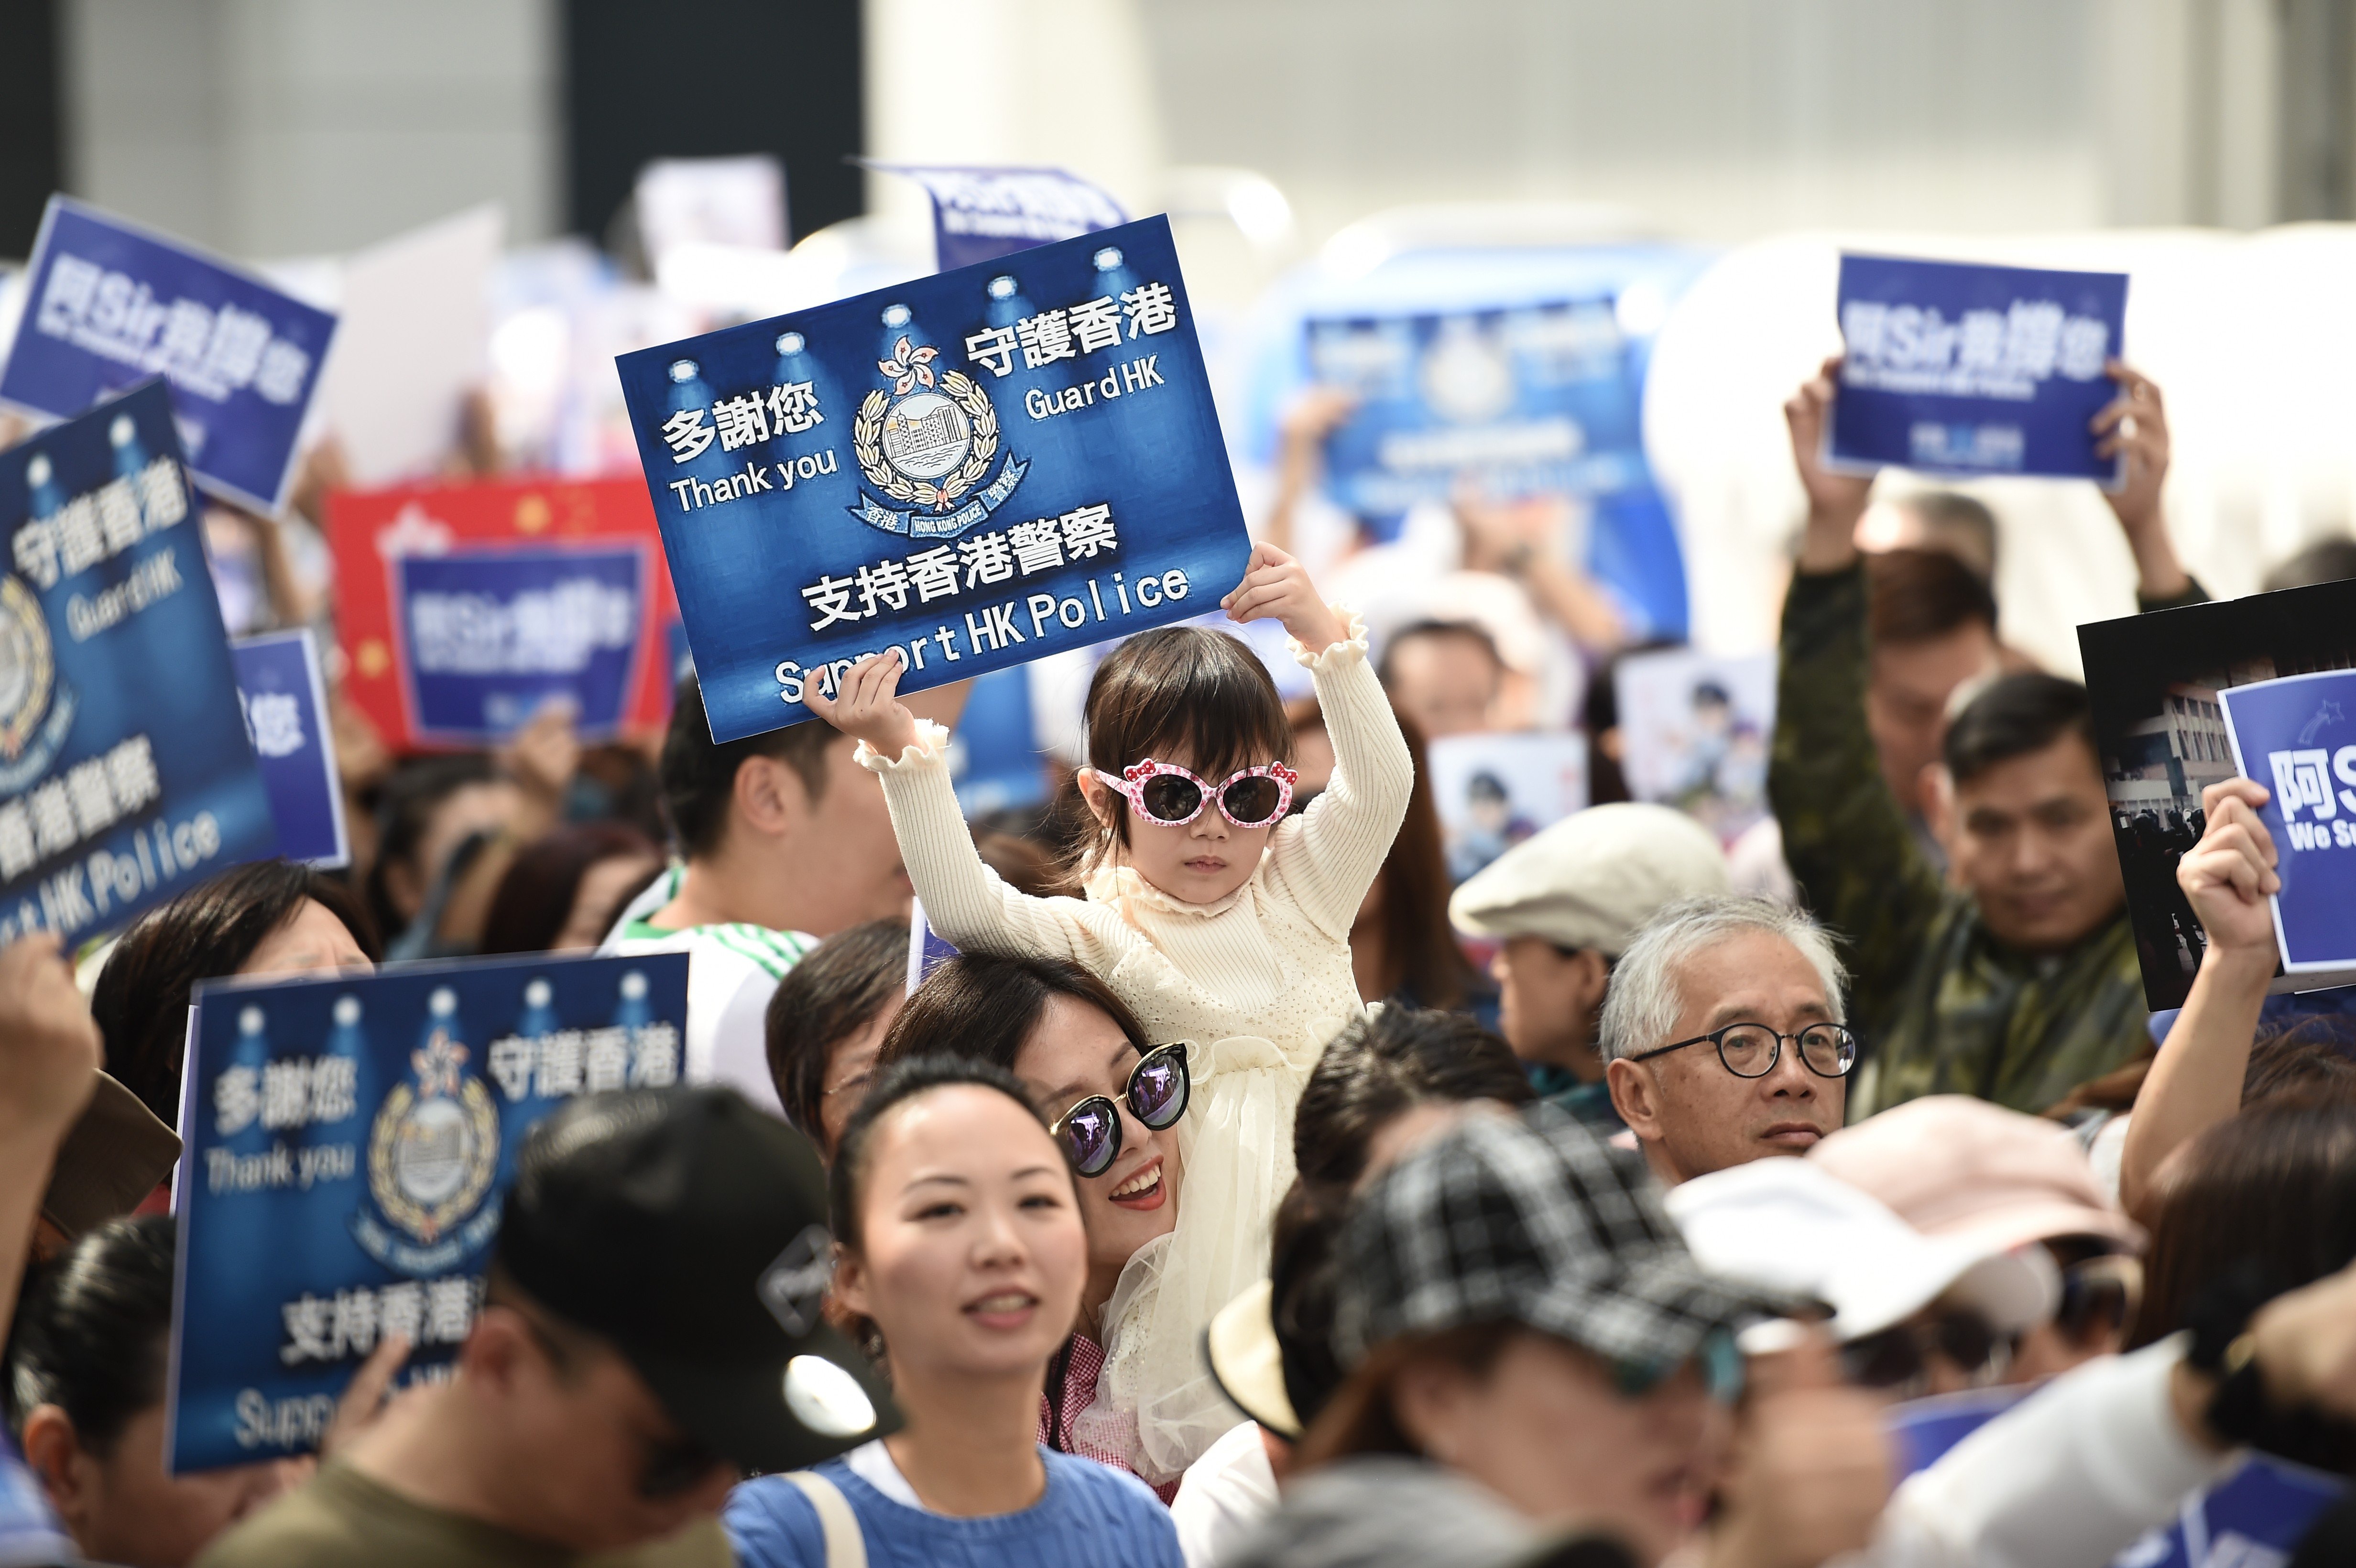 A child holds a placard at a pro-police rally outside the Legislative Council building in Hong Kong in November 2019. Photo: Ye Aung Thu/AFP